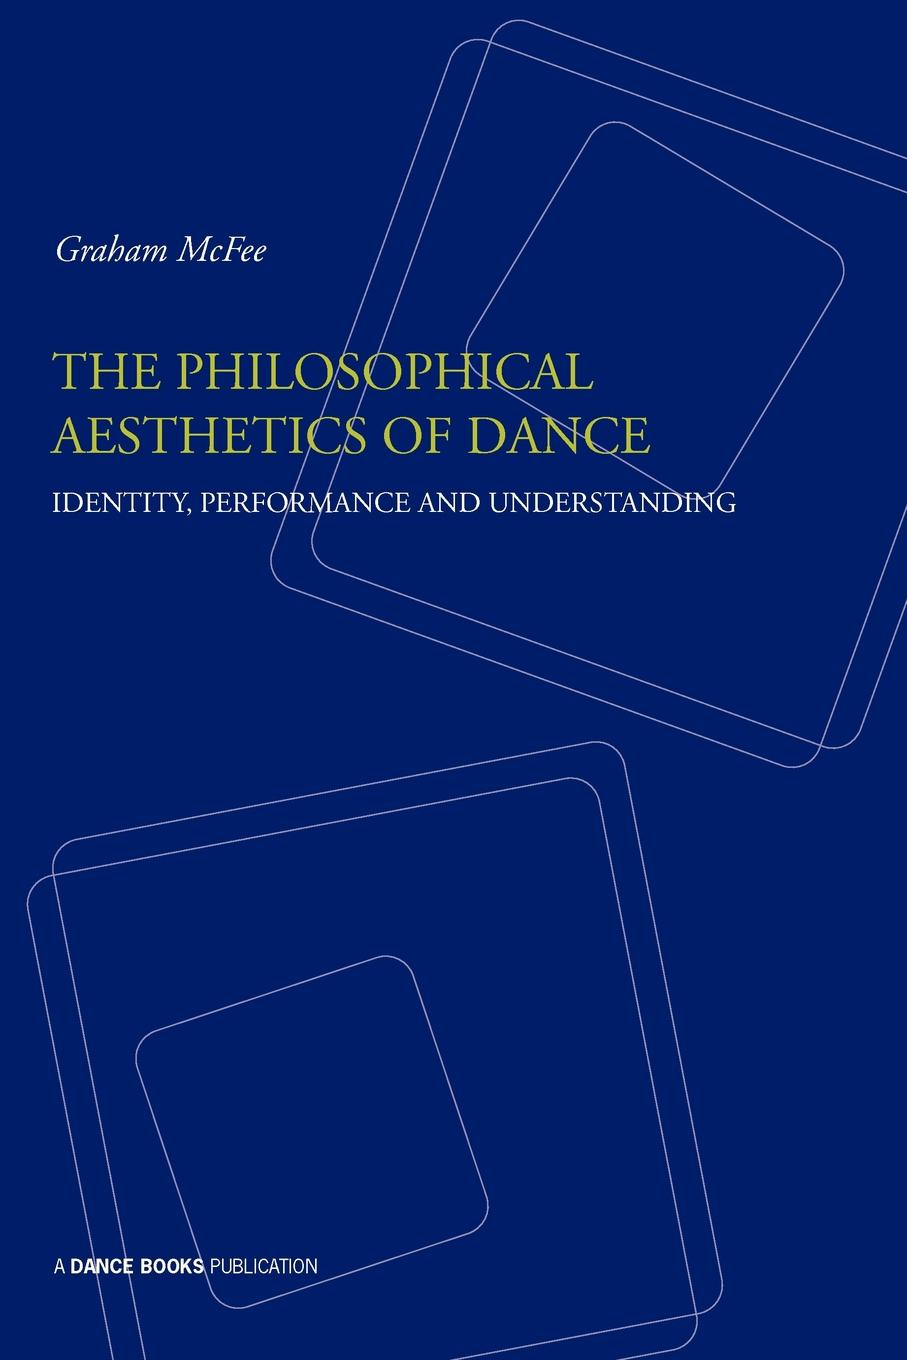 The Philosophical Aesthetics of Dance. Identity, Performance and Understanding